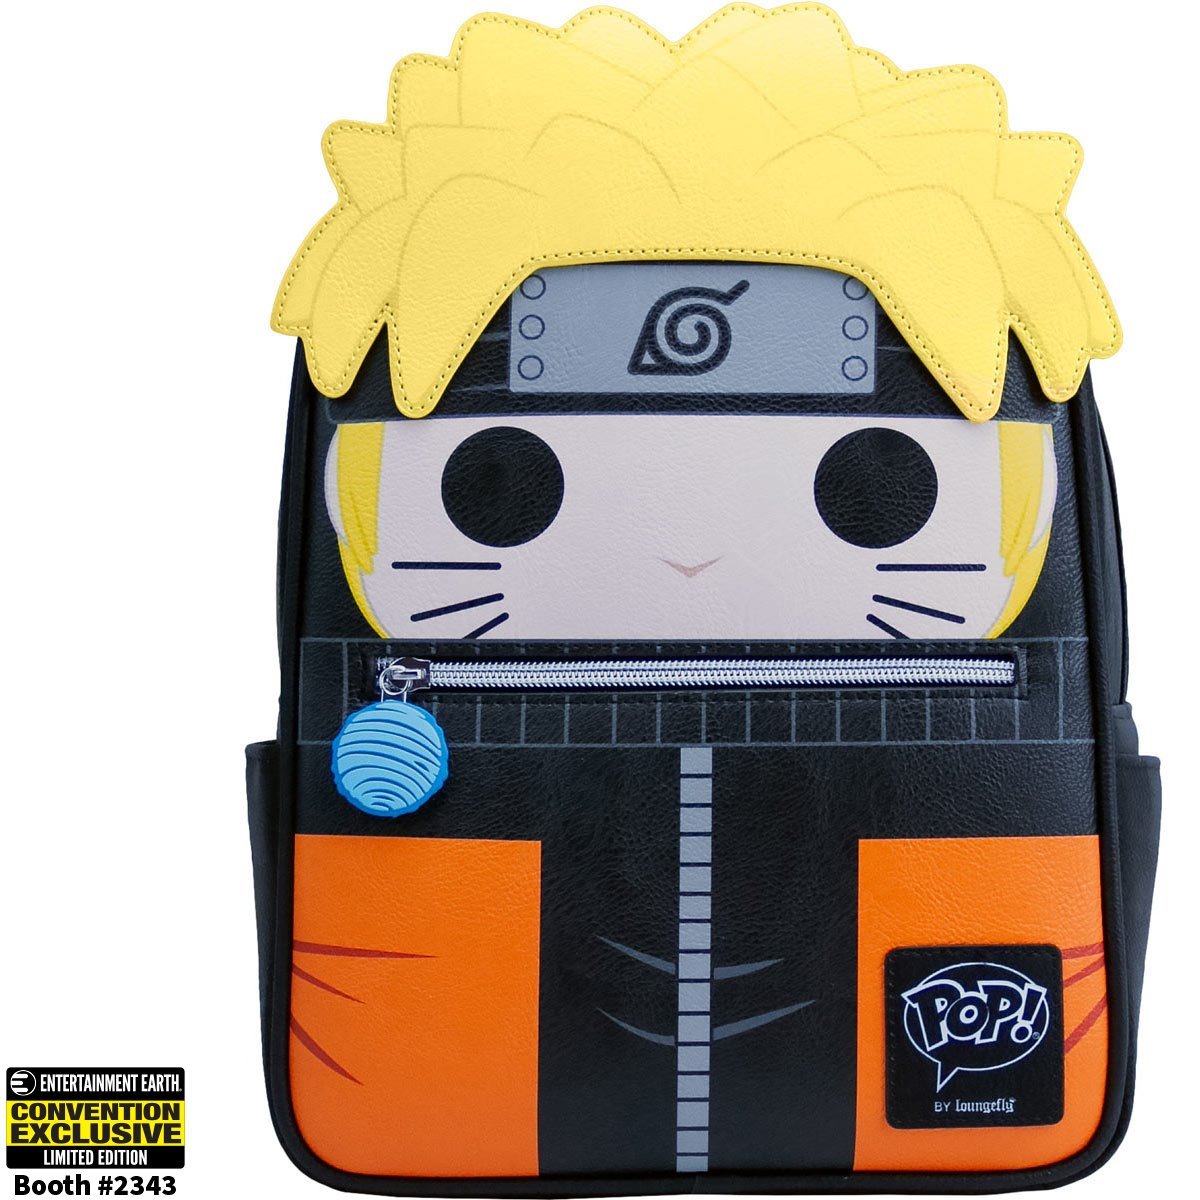 Loungefly The Office Sabre Lunch Bag - Convention Exclusive